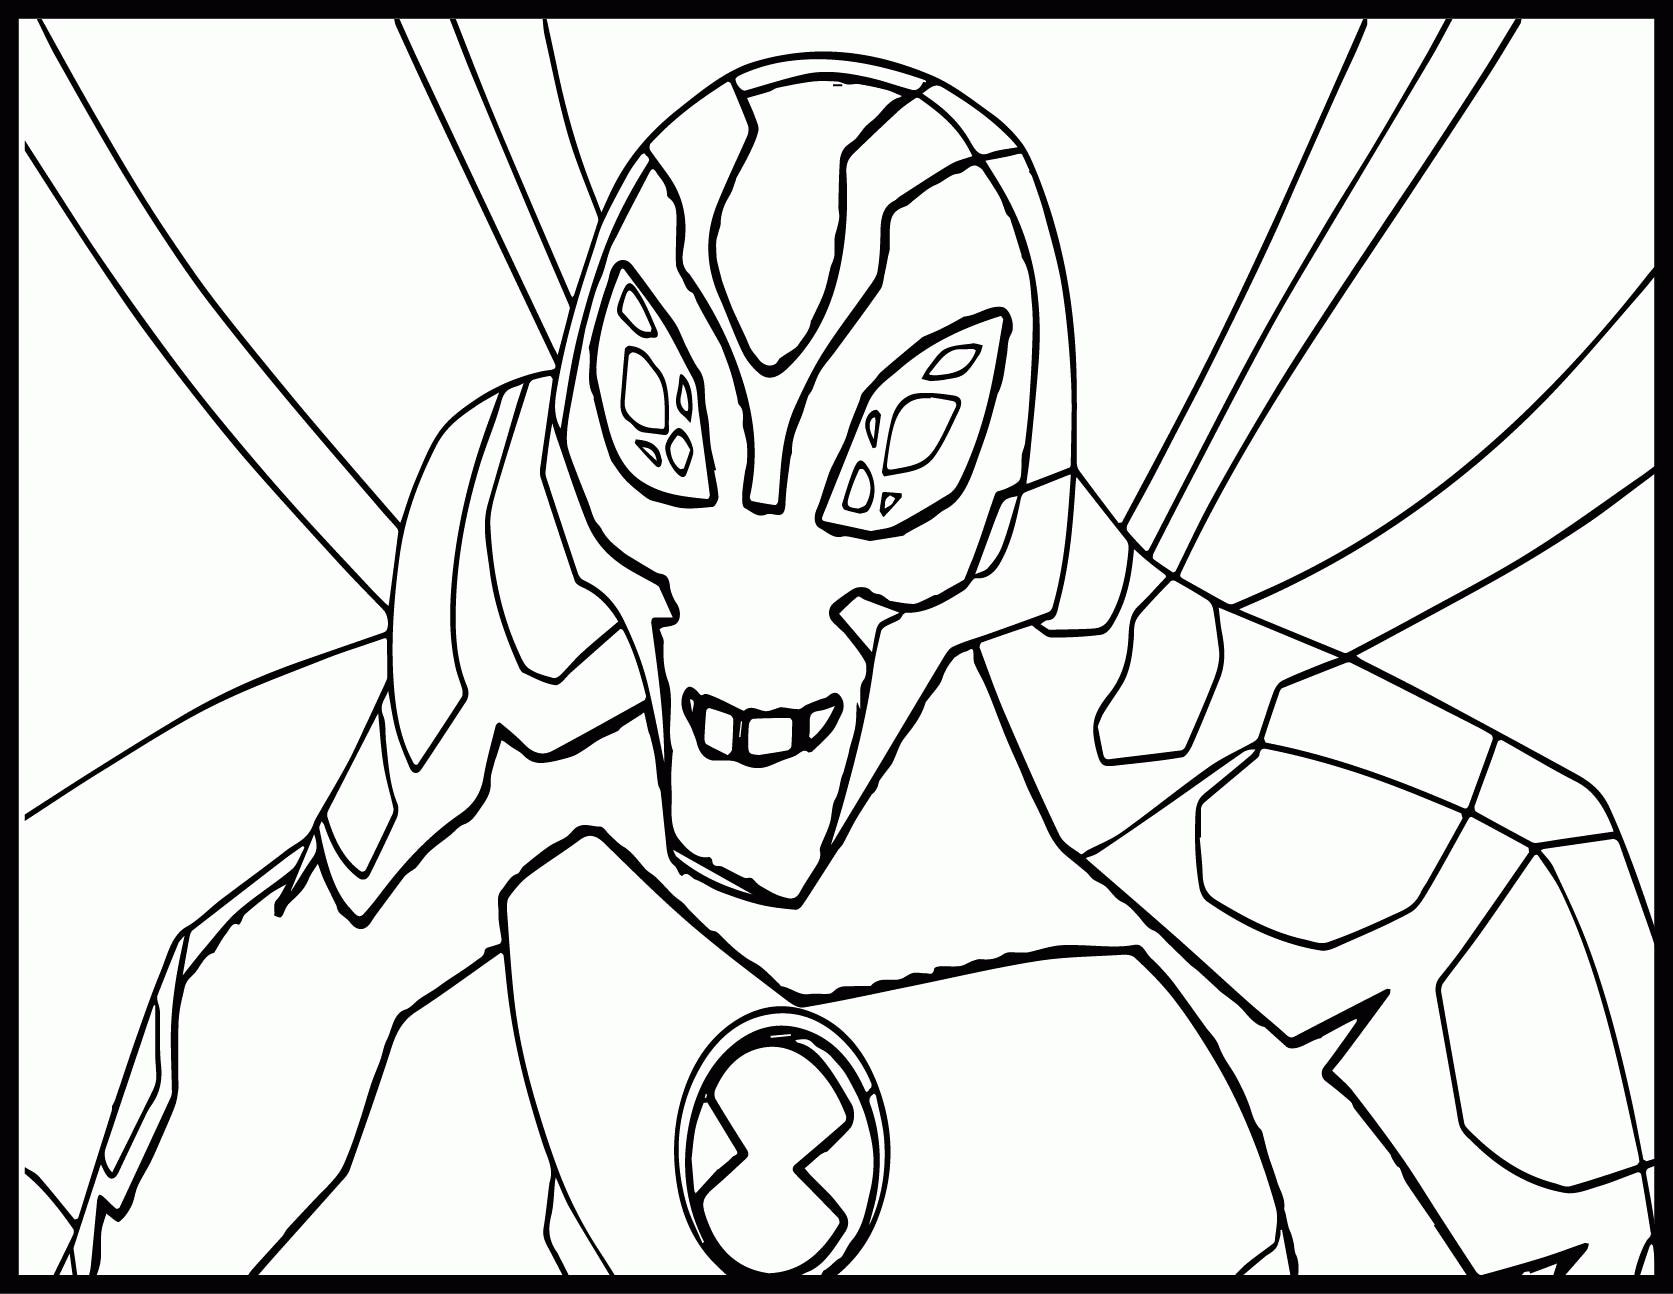 Ben 10 Ultimate Alien Big Chill Coloring Pages - Coloring Page